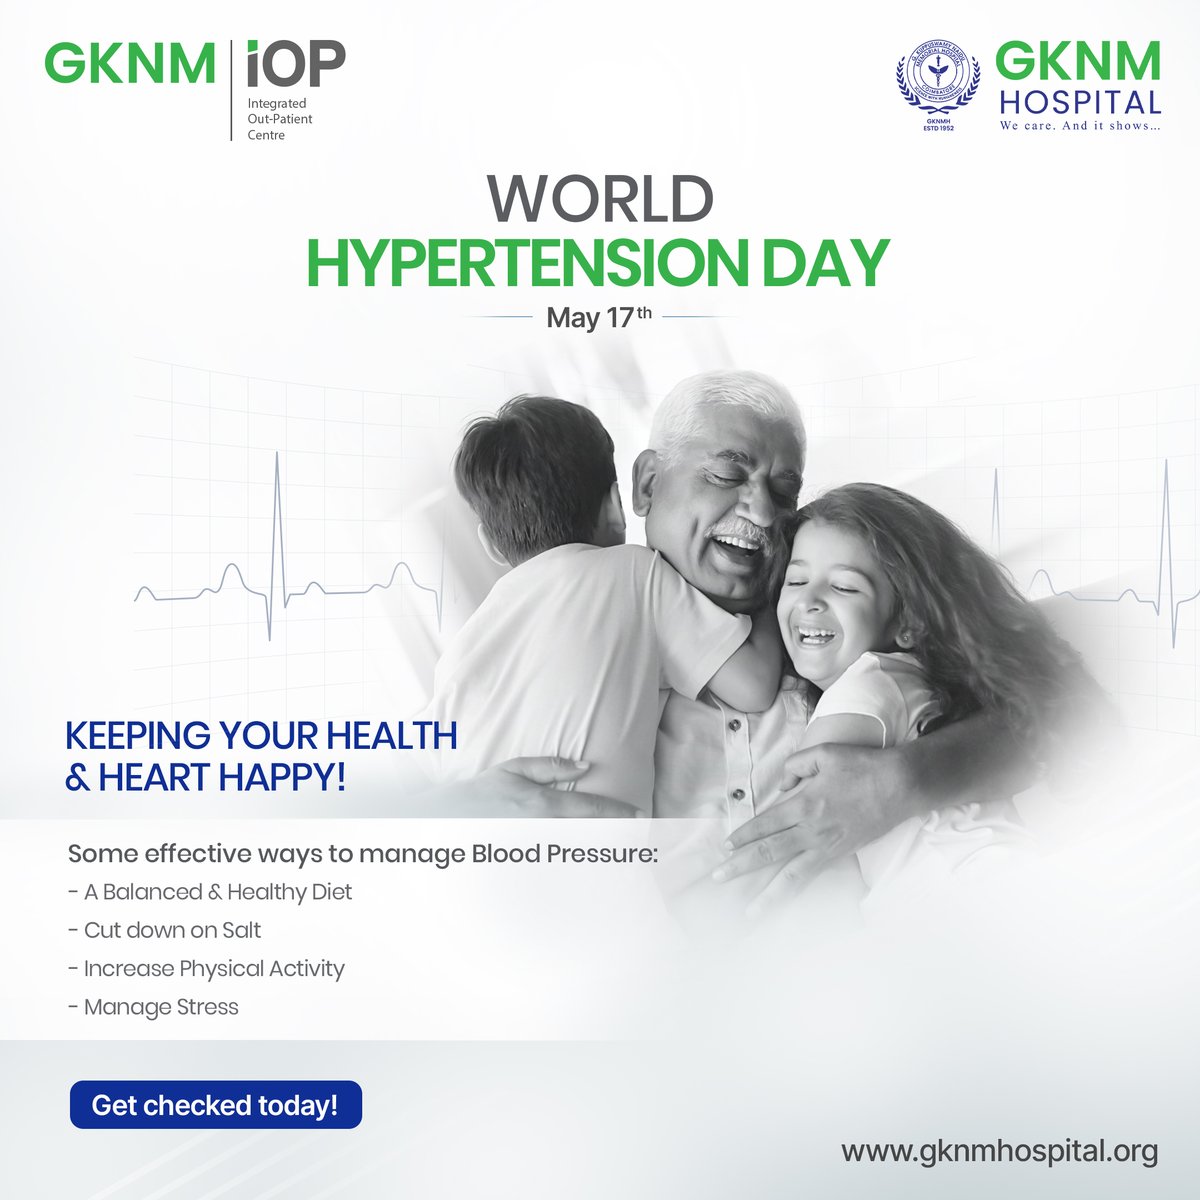 Eat healthy, move a bit more and calm down! #hypertensionday2024 #WorldHypertensionDay #HyperTension #MentalHealth #StressFree #HealthyLifestyle #Diet #Exercise #Cholesterol #BeatThePressure #HealthyLiving #Health #GKNM #GKNMH #GKNMiOP #GKNMhospital